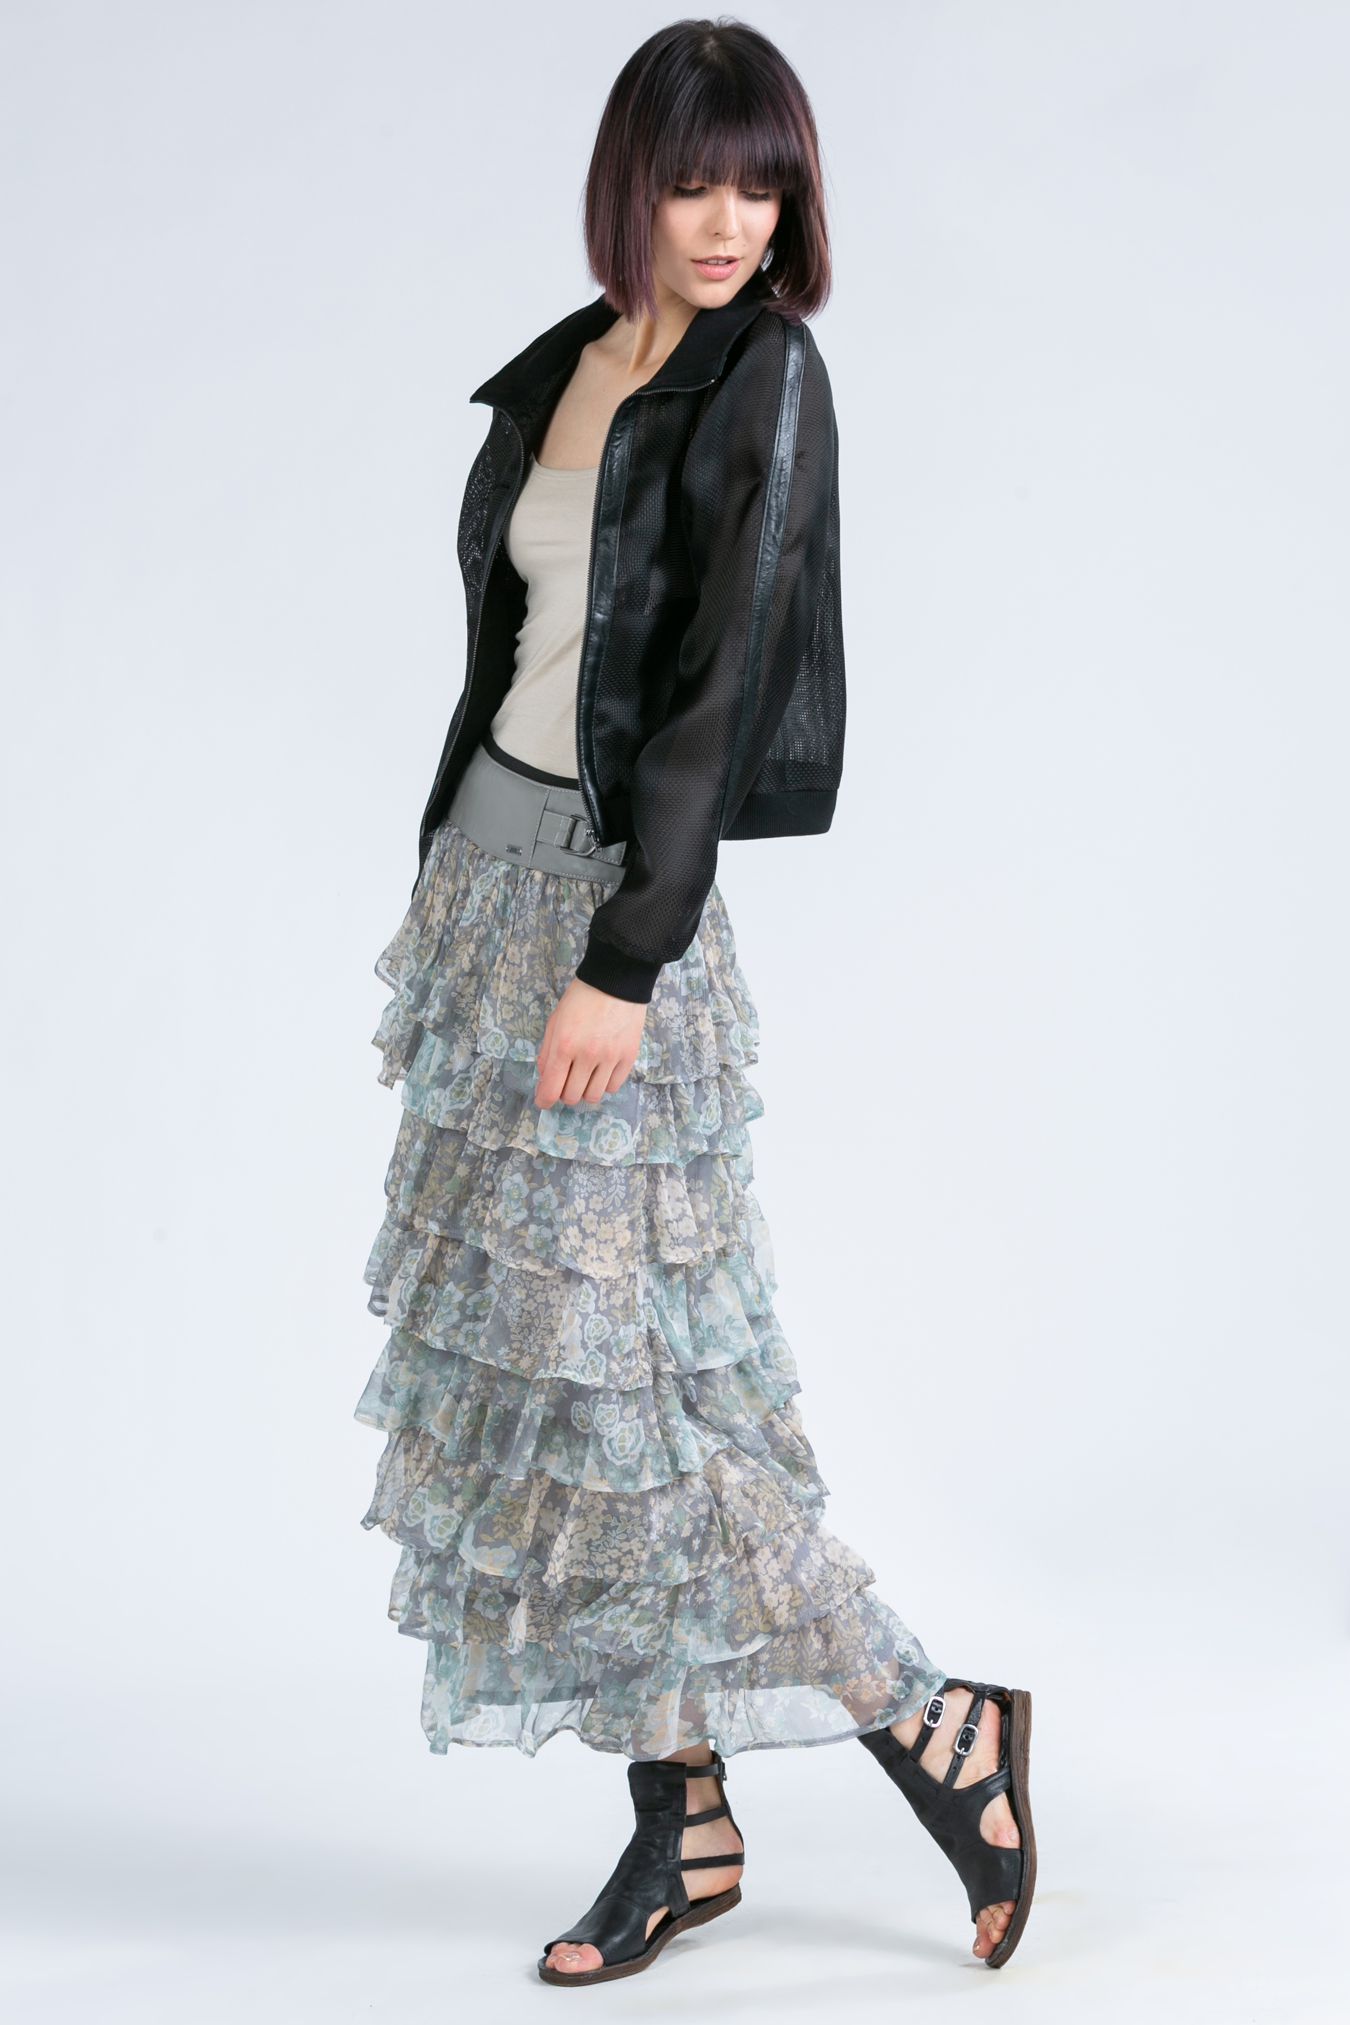 maxi skirt made of silk and leather, silk skirt with a leather yoke and ruffles, floral pattern skirt, ash maxi skirt, long skirt with a yoke made of natural leather and silk chiffon